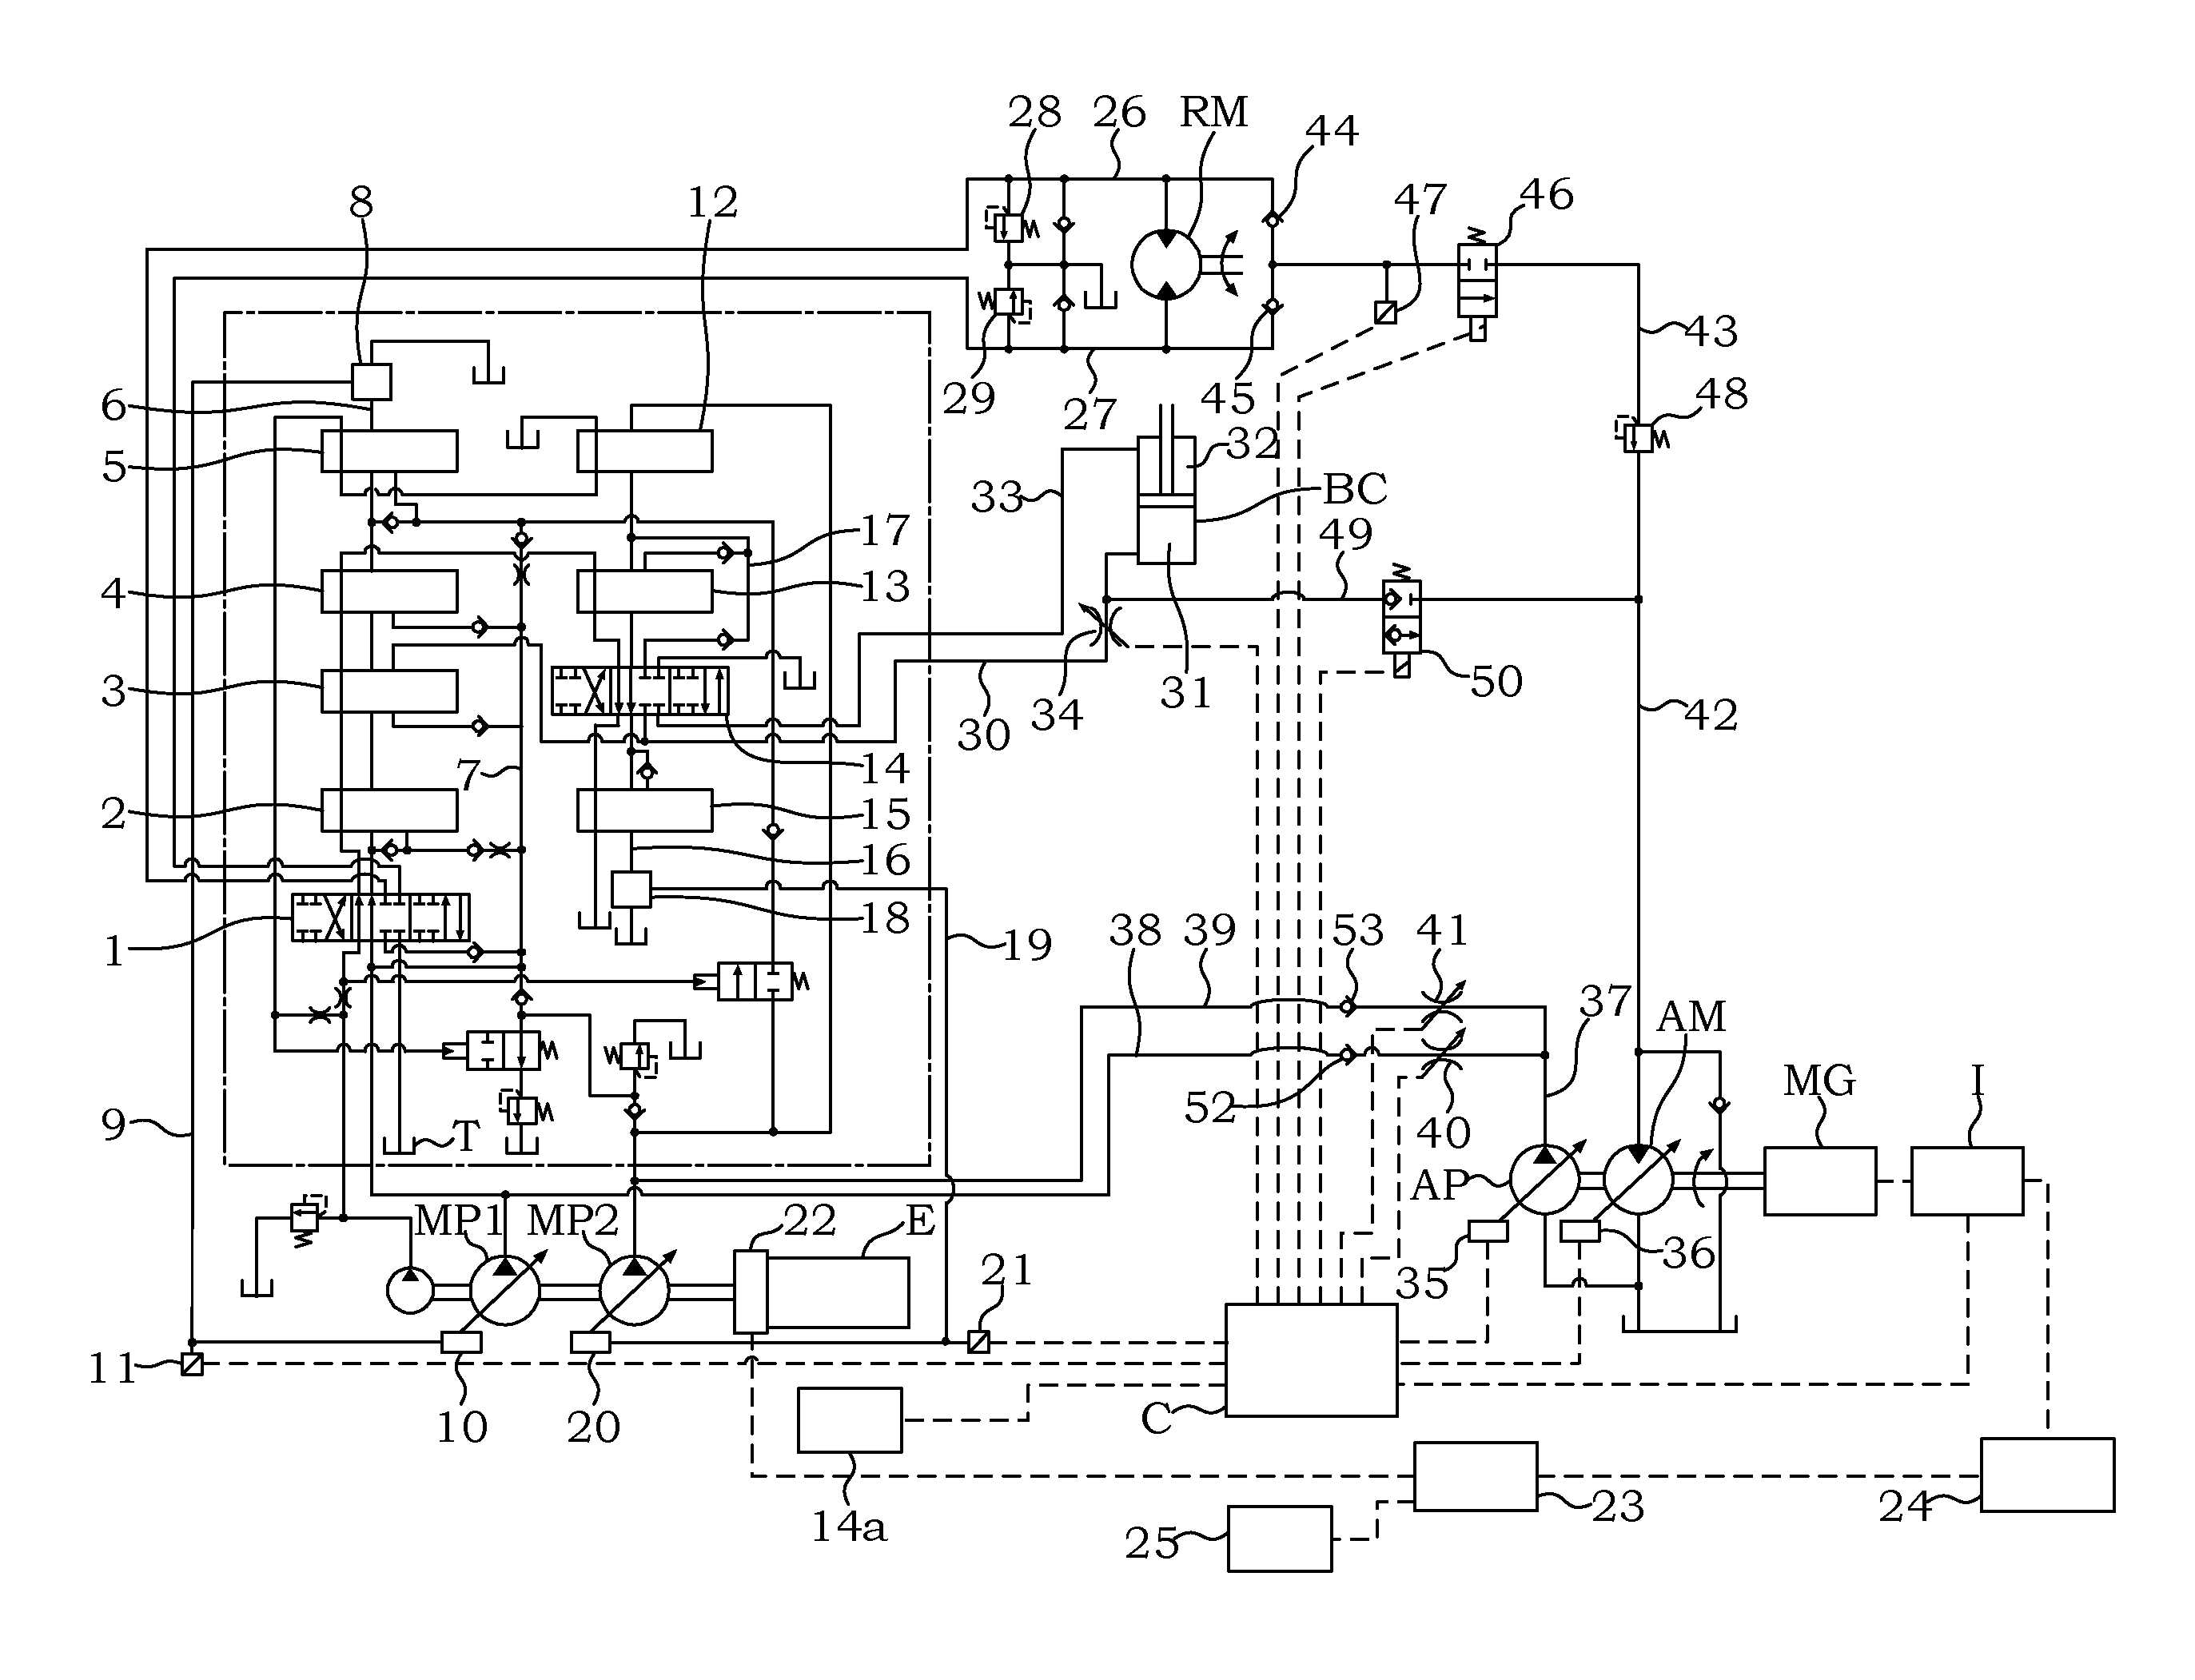 Control system for hybrid construction machine